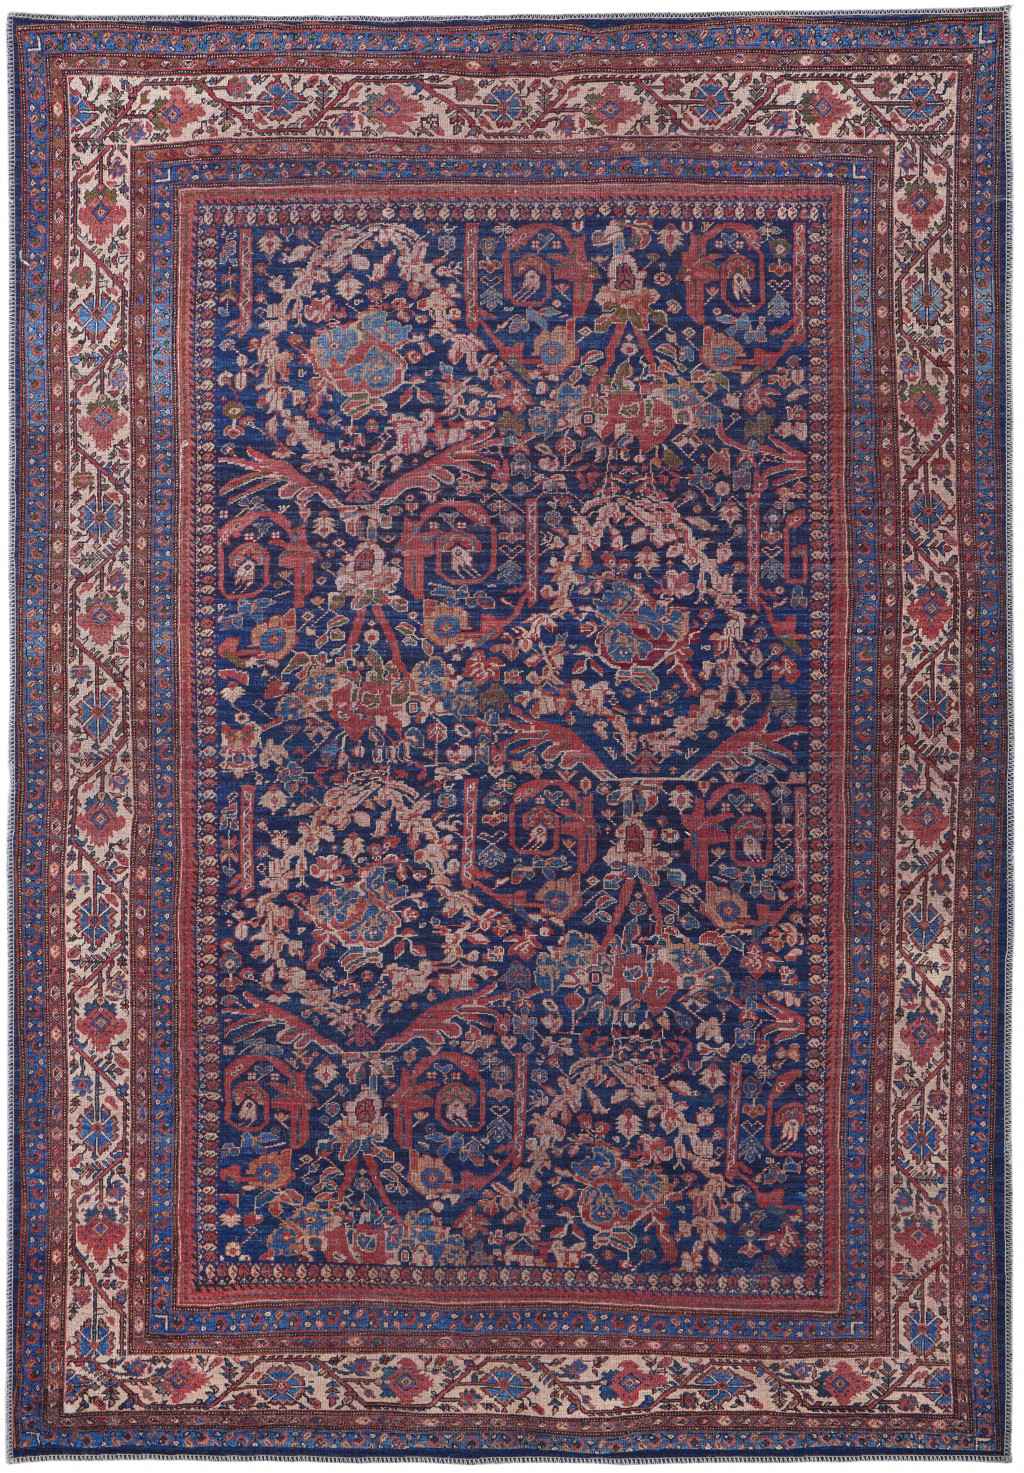 9' X 12' Red Blue And Tan Floral Power Loom Area Rug-515108-1